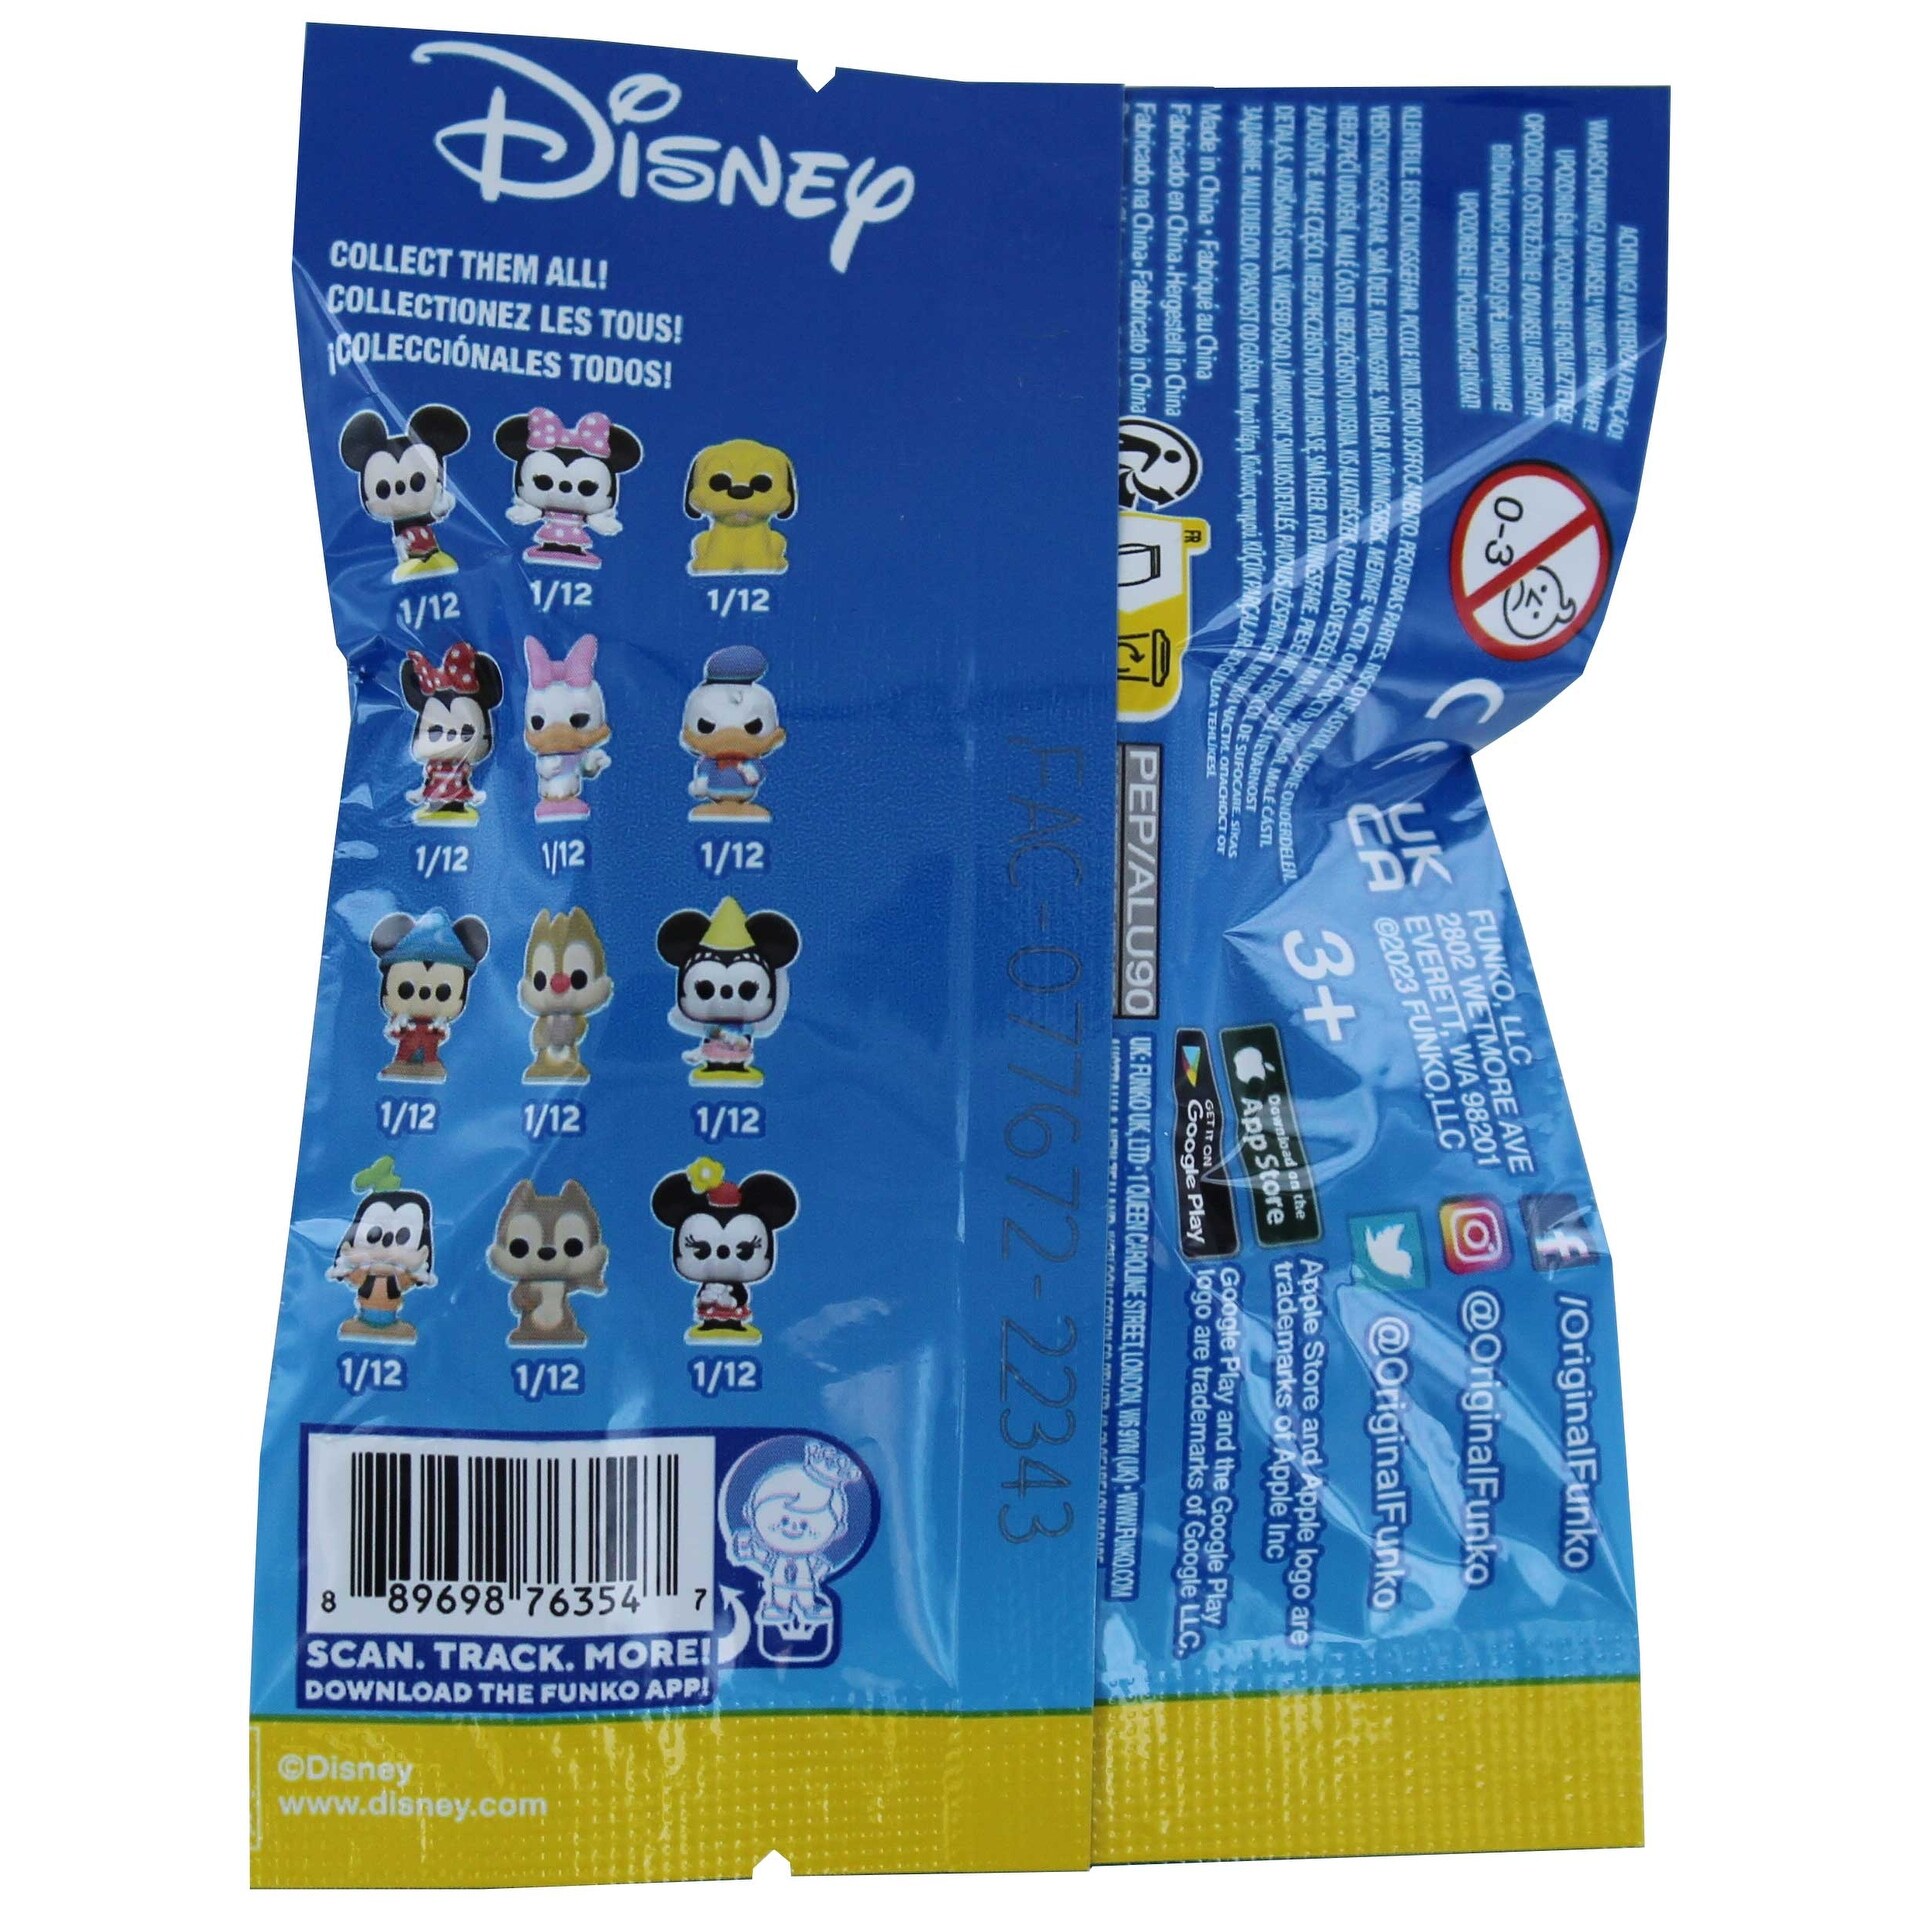 Disney Mickey And Friends Food Blind Bag Figural Key Chain